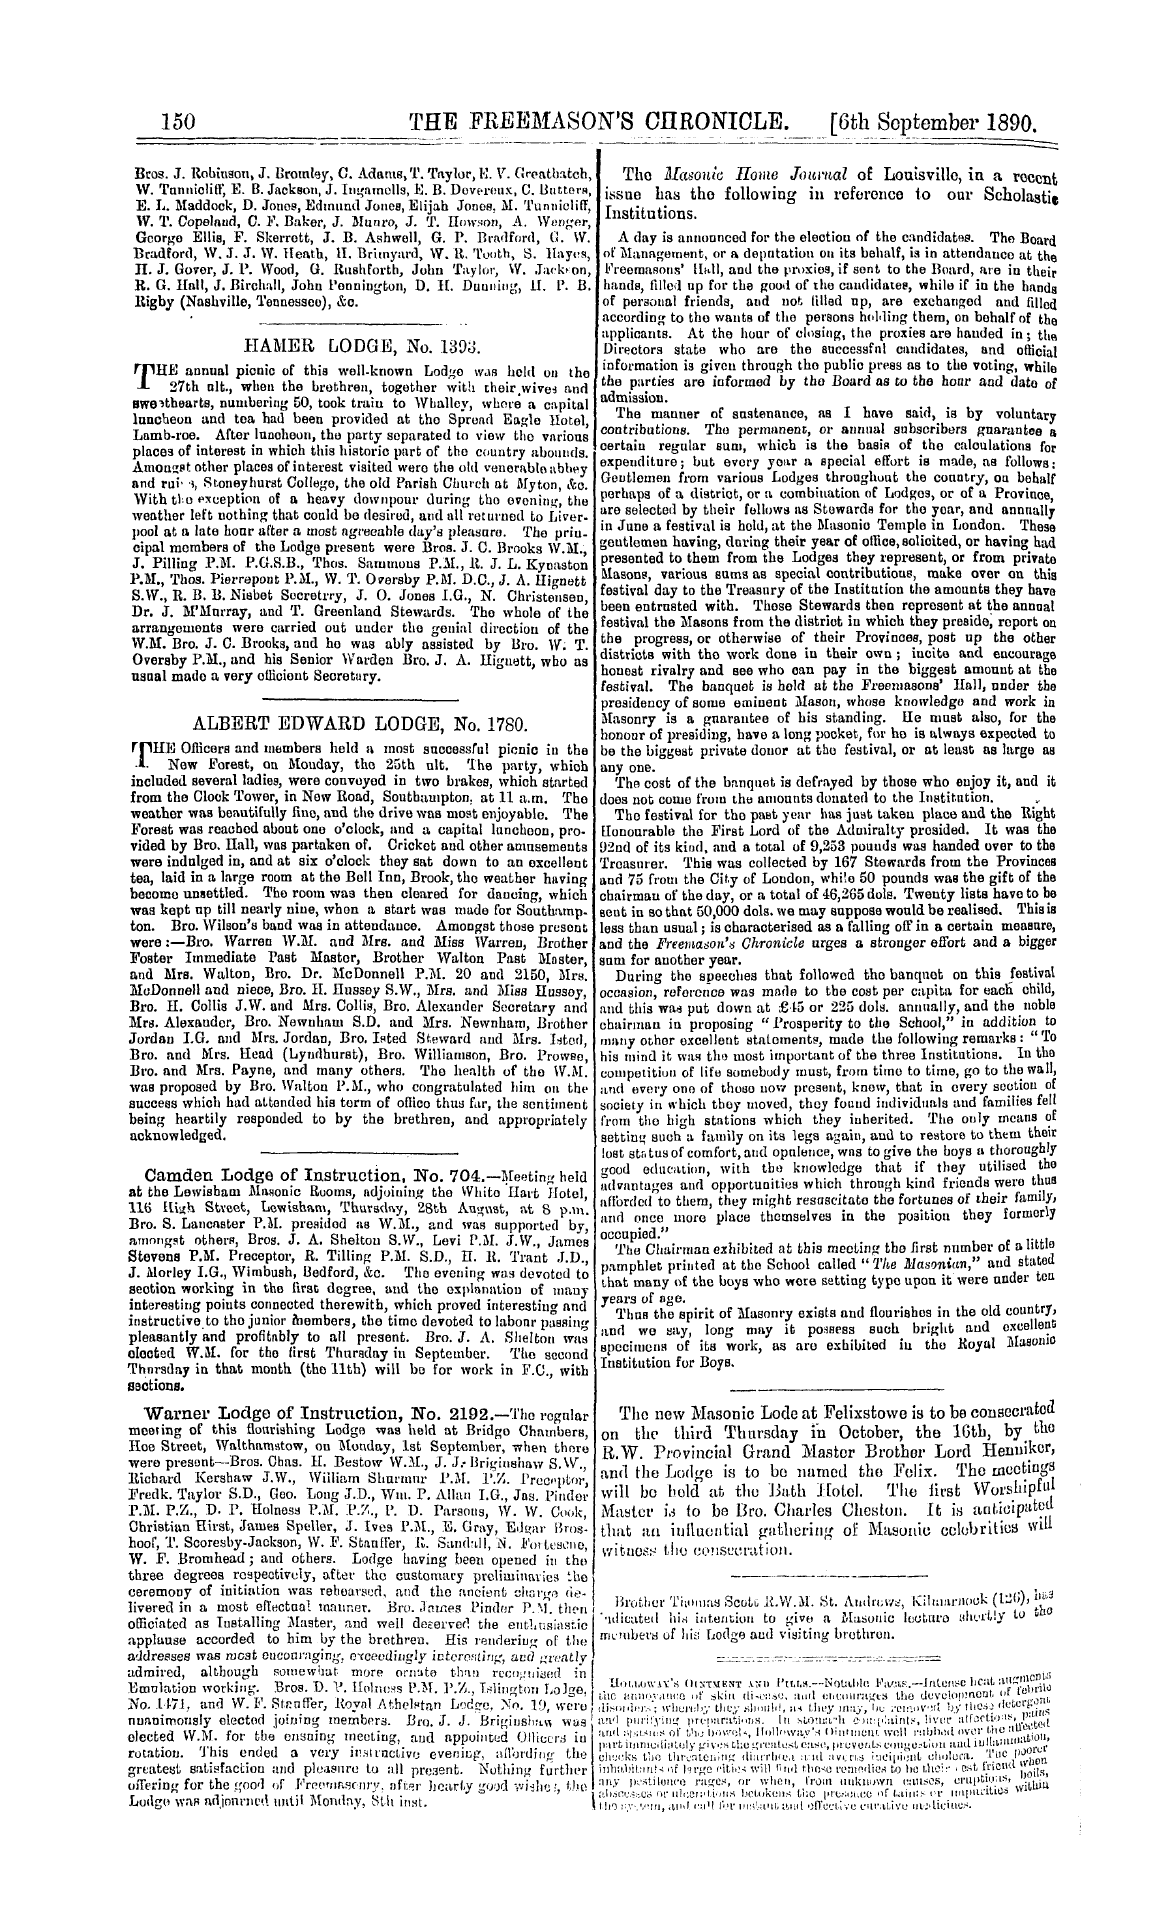 The Freemason's Chronicle: 1890-09-06 - Notices Of Meetings.